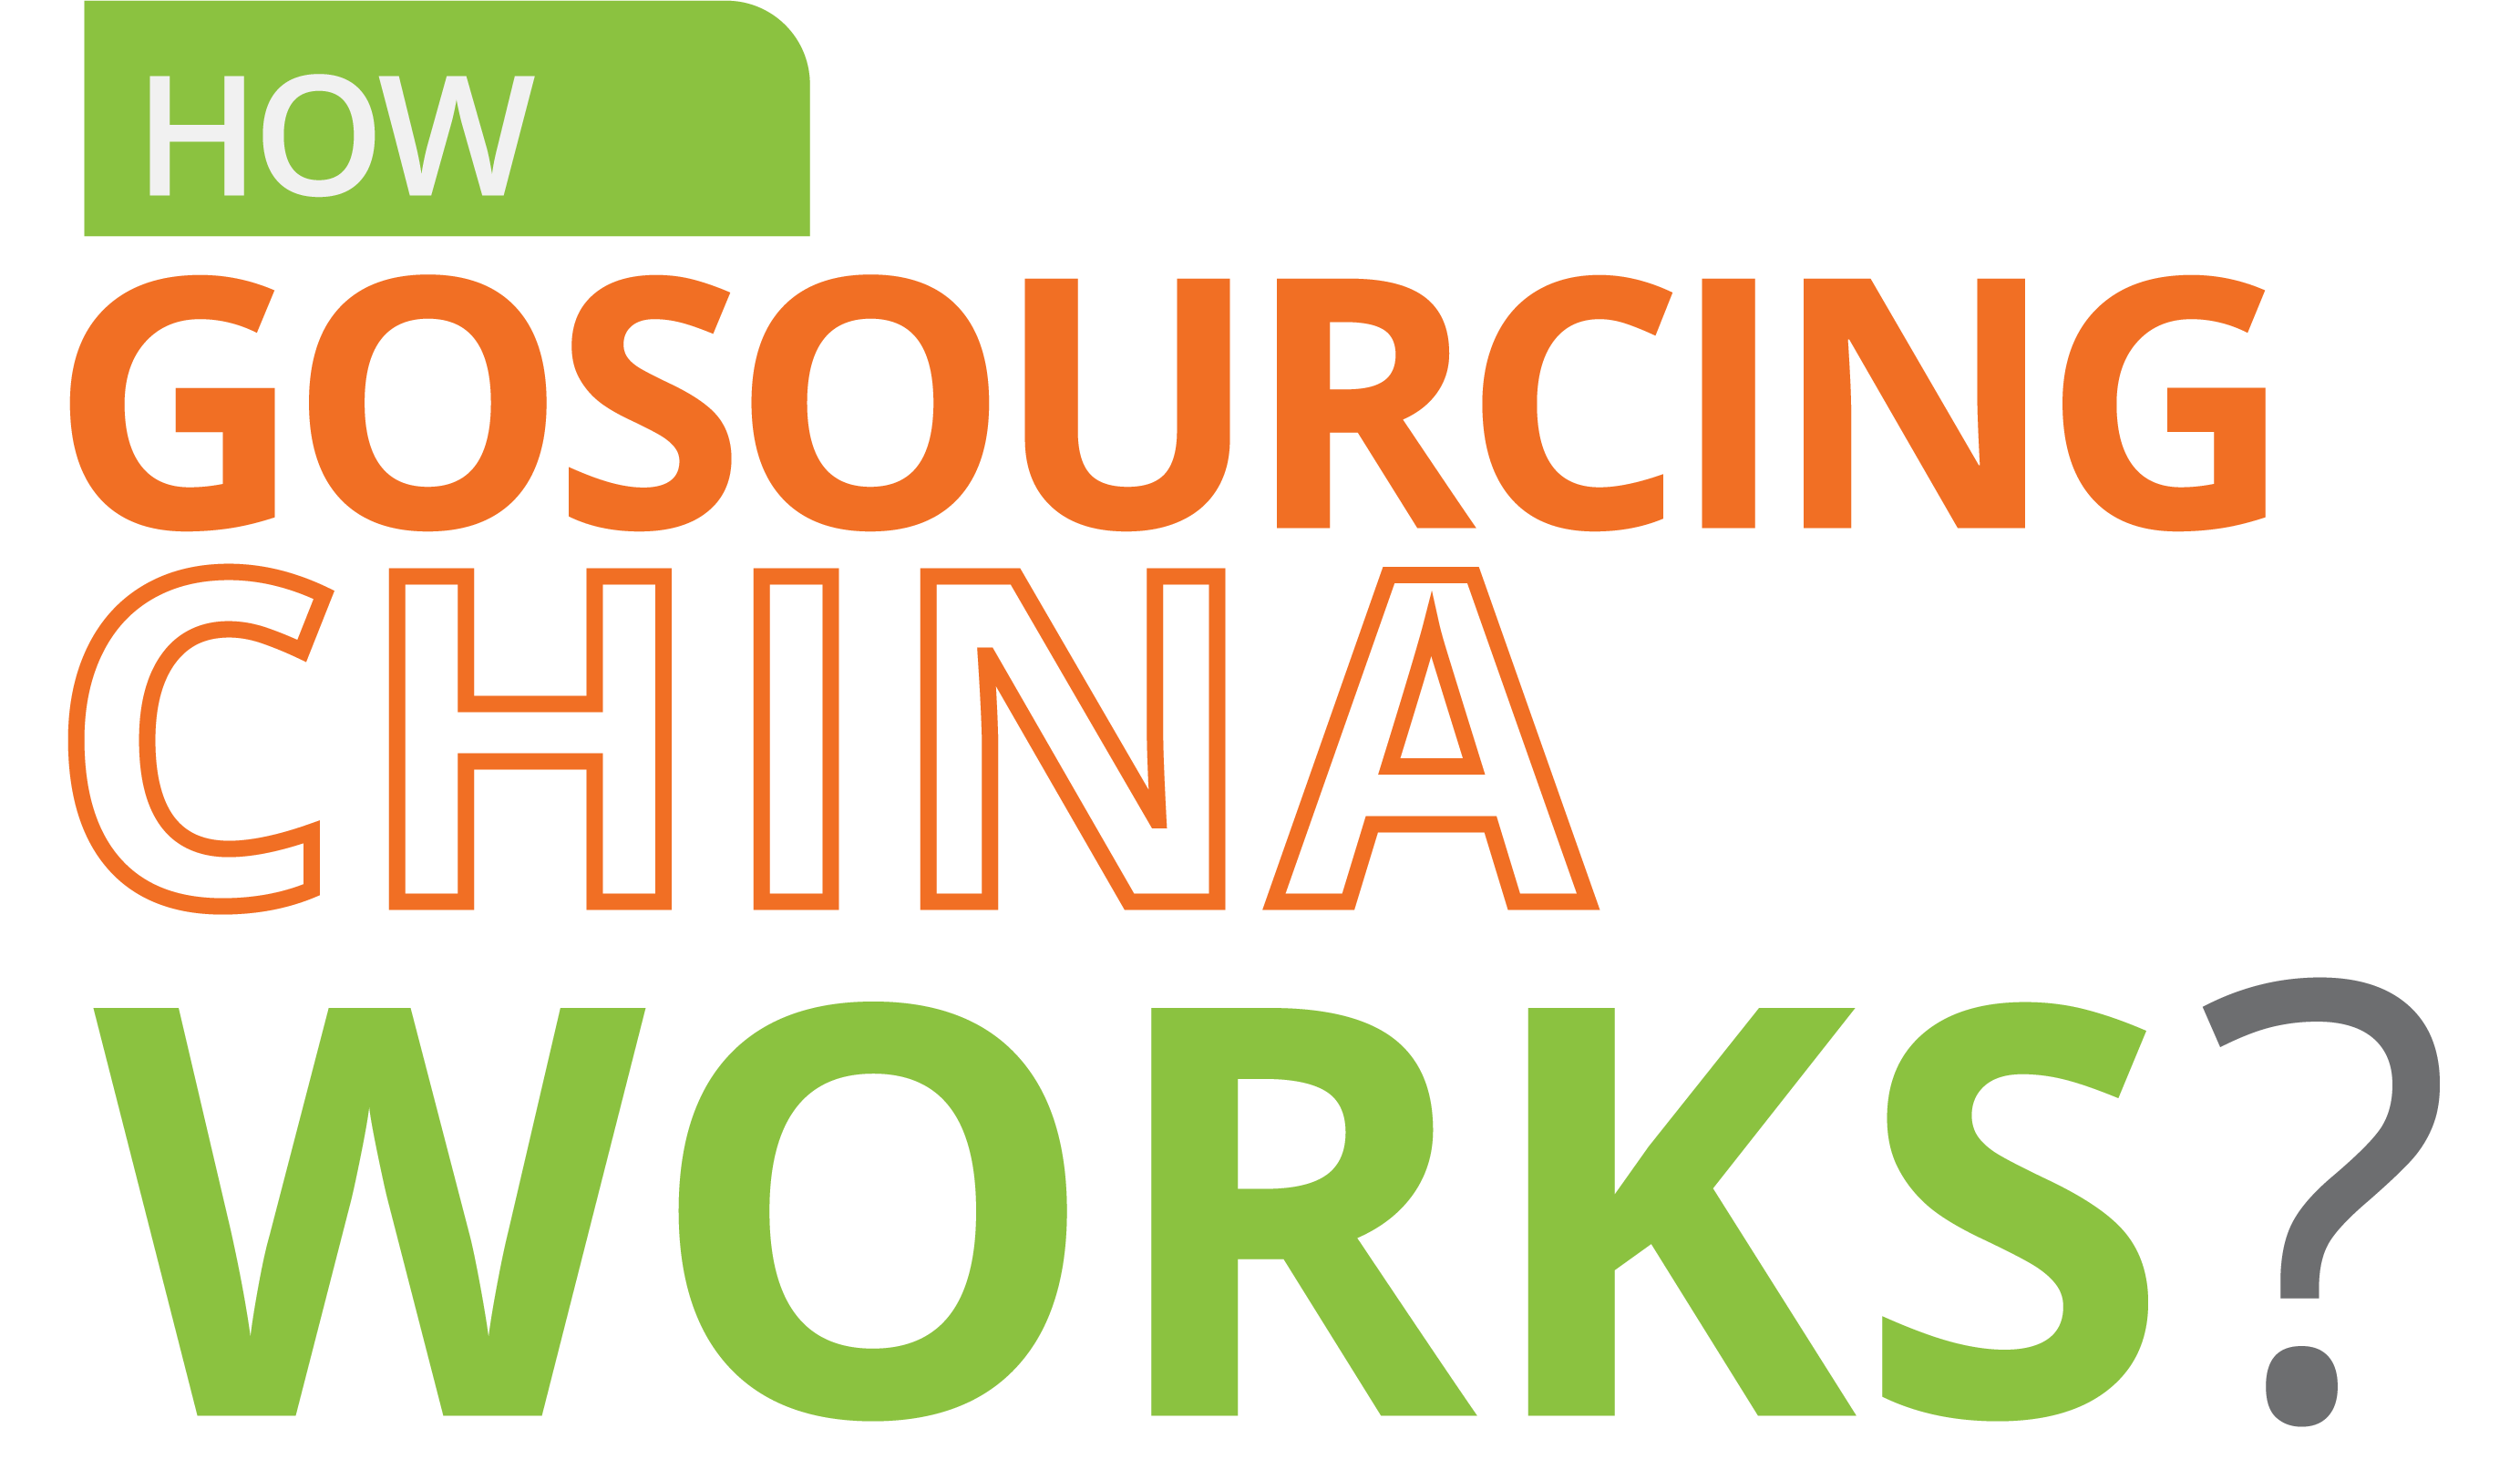 How GoSourcing-China works?